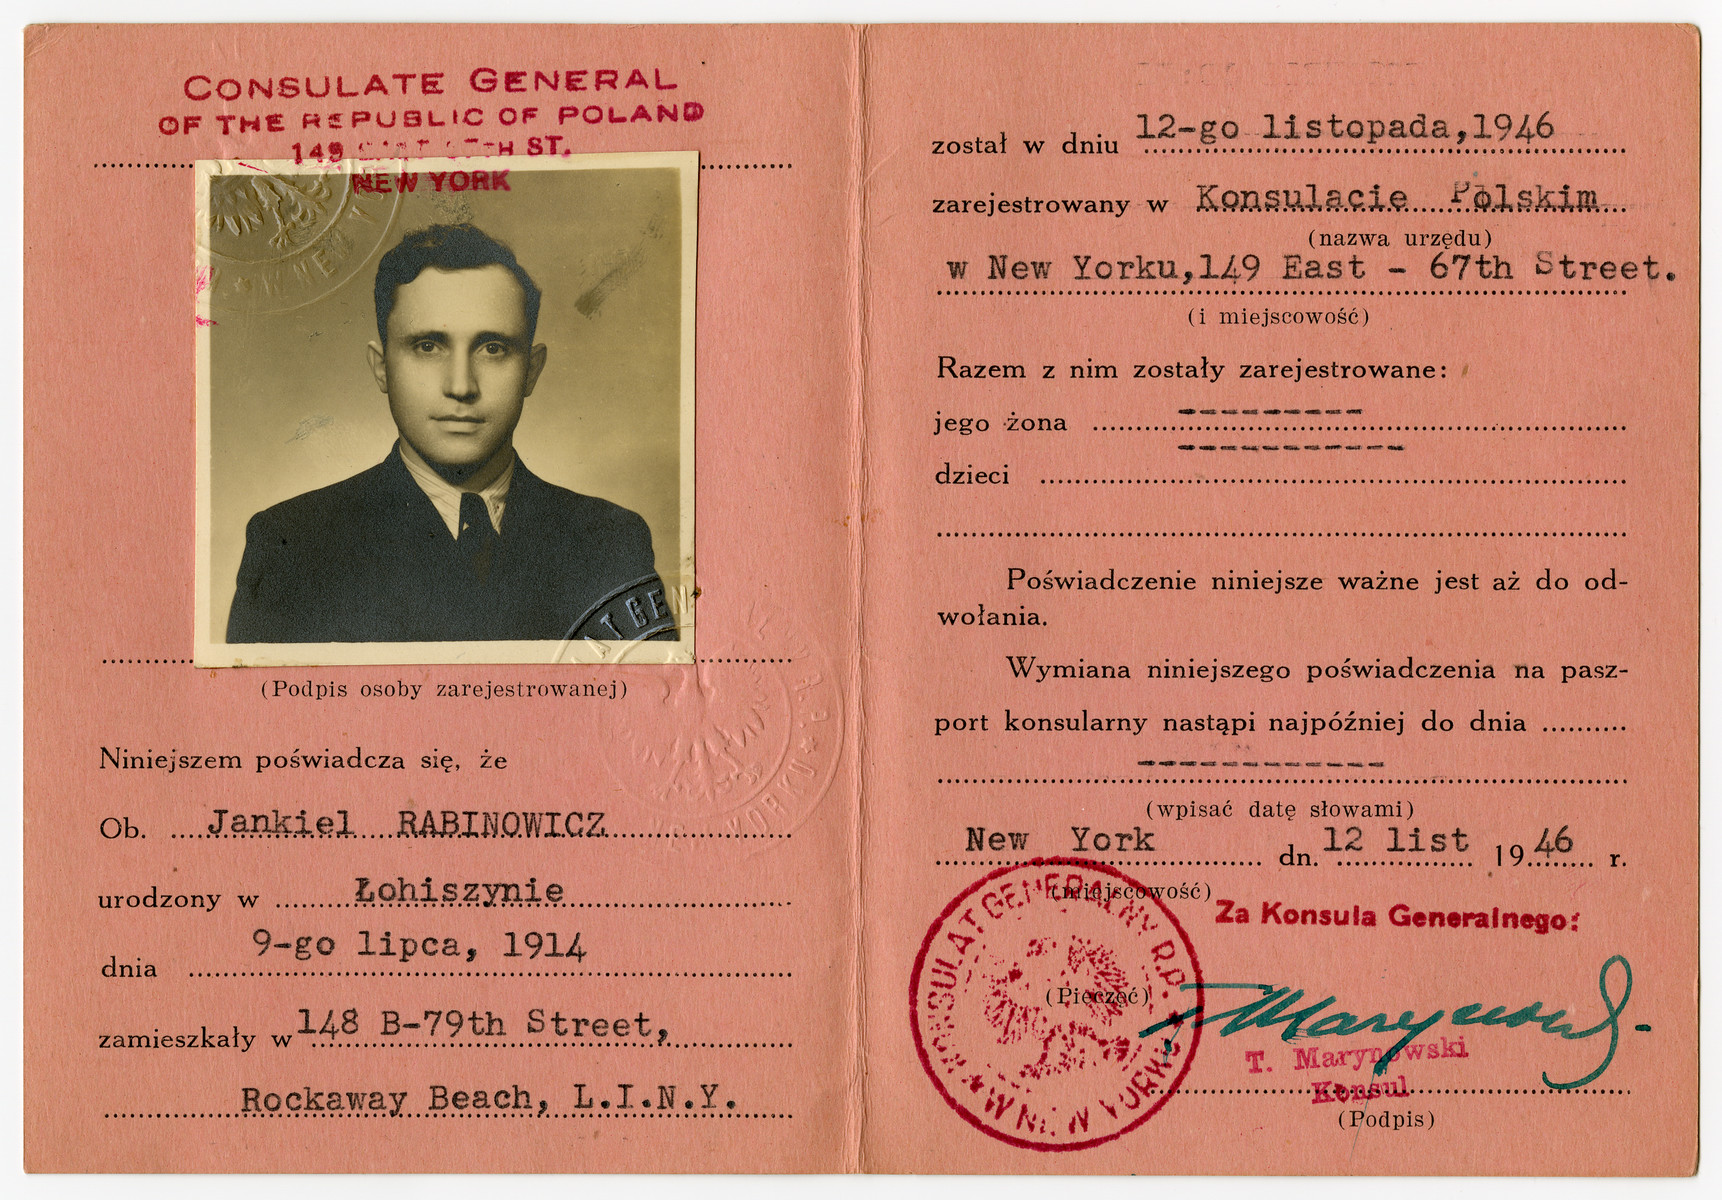 Identification card issued by the Consulate General of the Republic of Poland to Jankiel Rabinowicz, a recent immigrant to the United States.